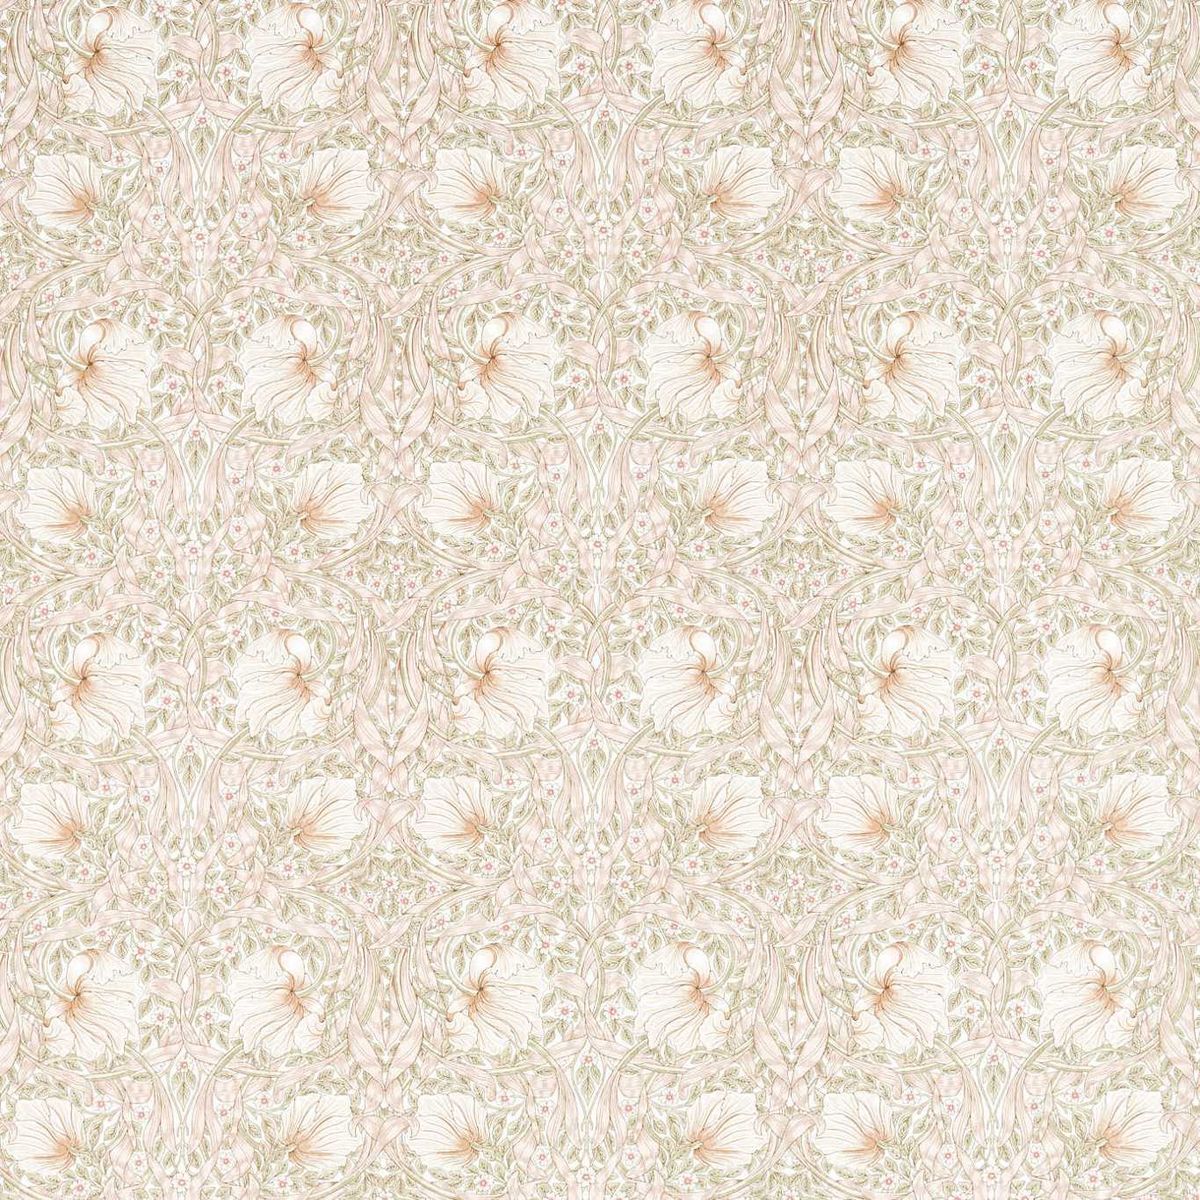 Pimpernel Cochineal Pink Fabric by William Morris & Co.